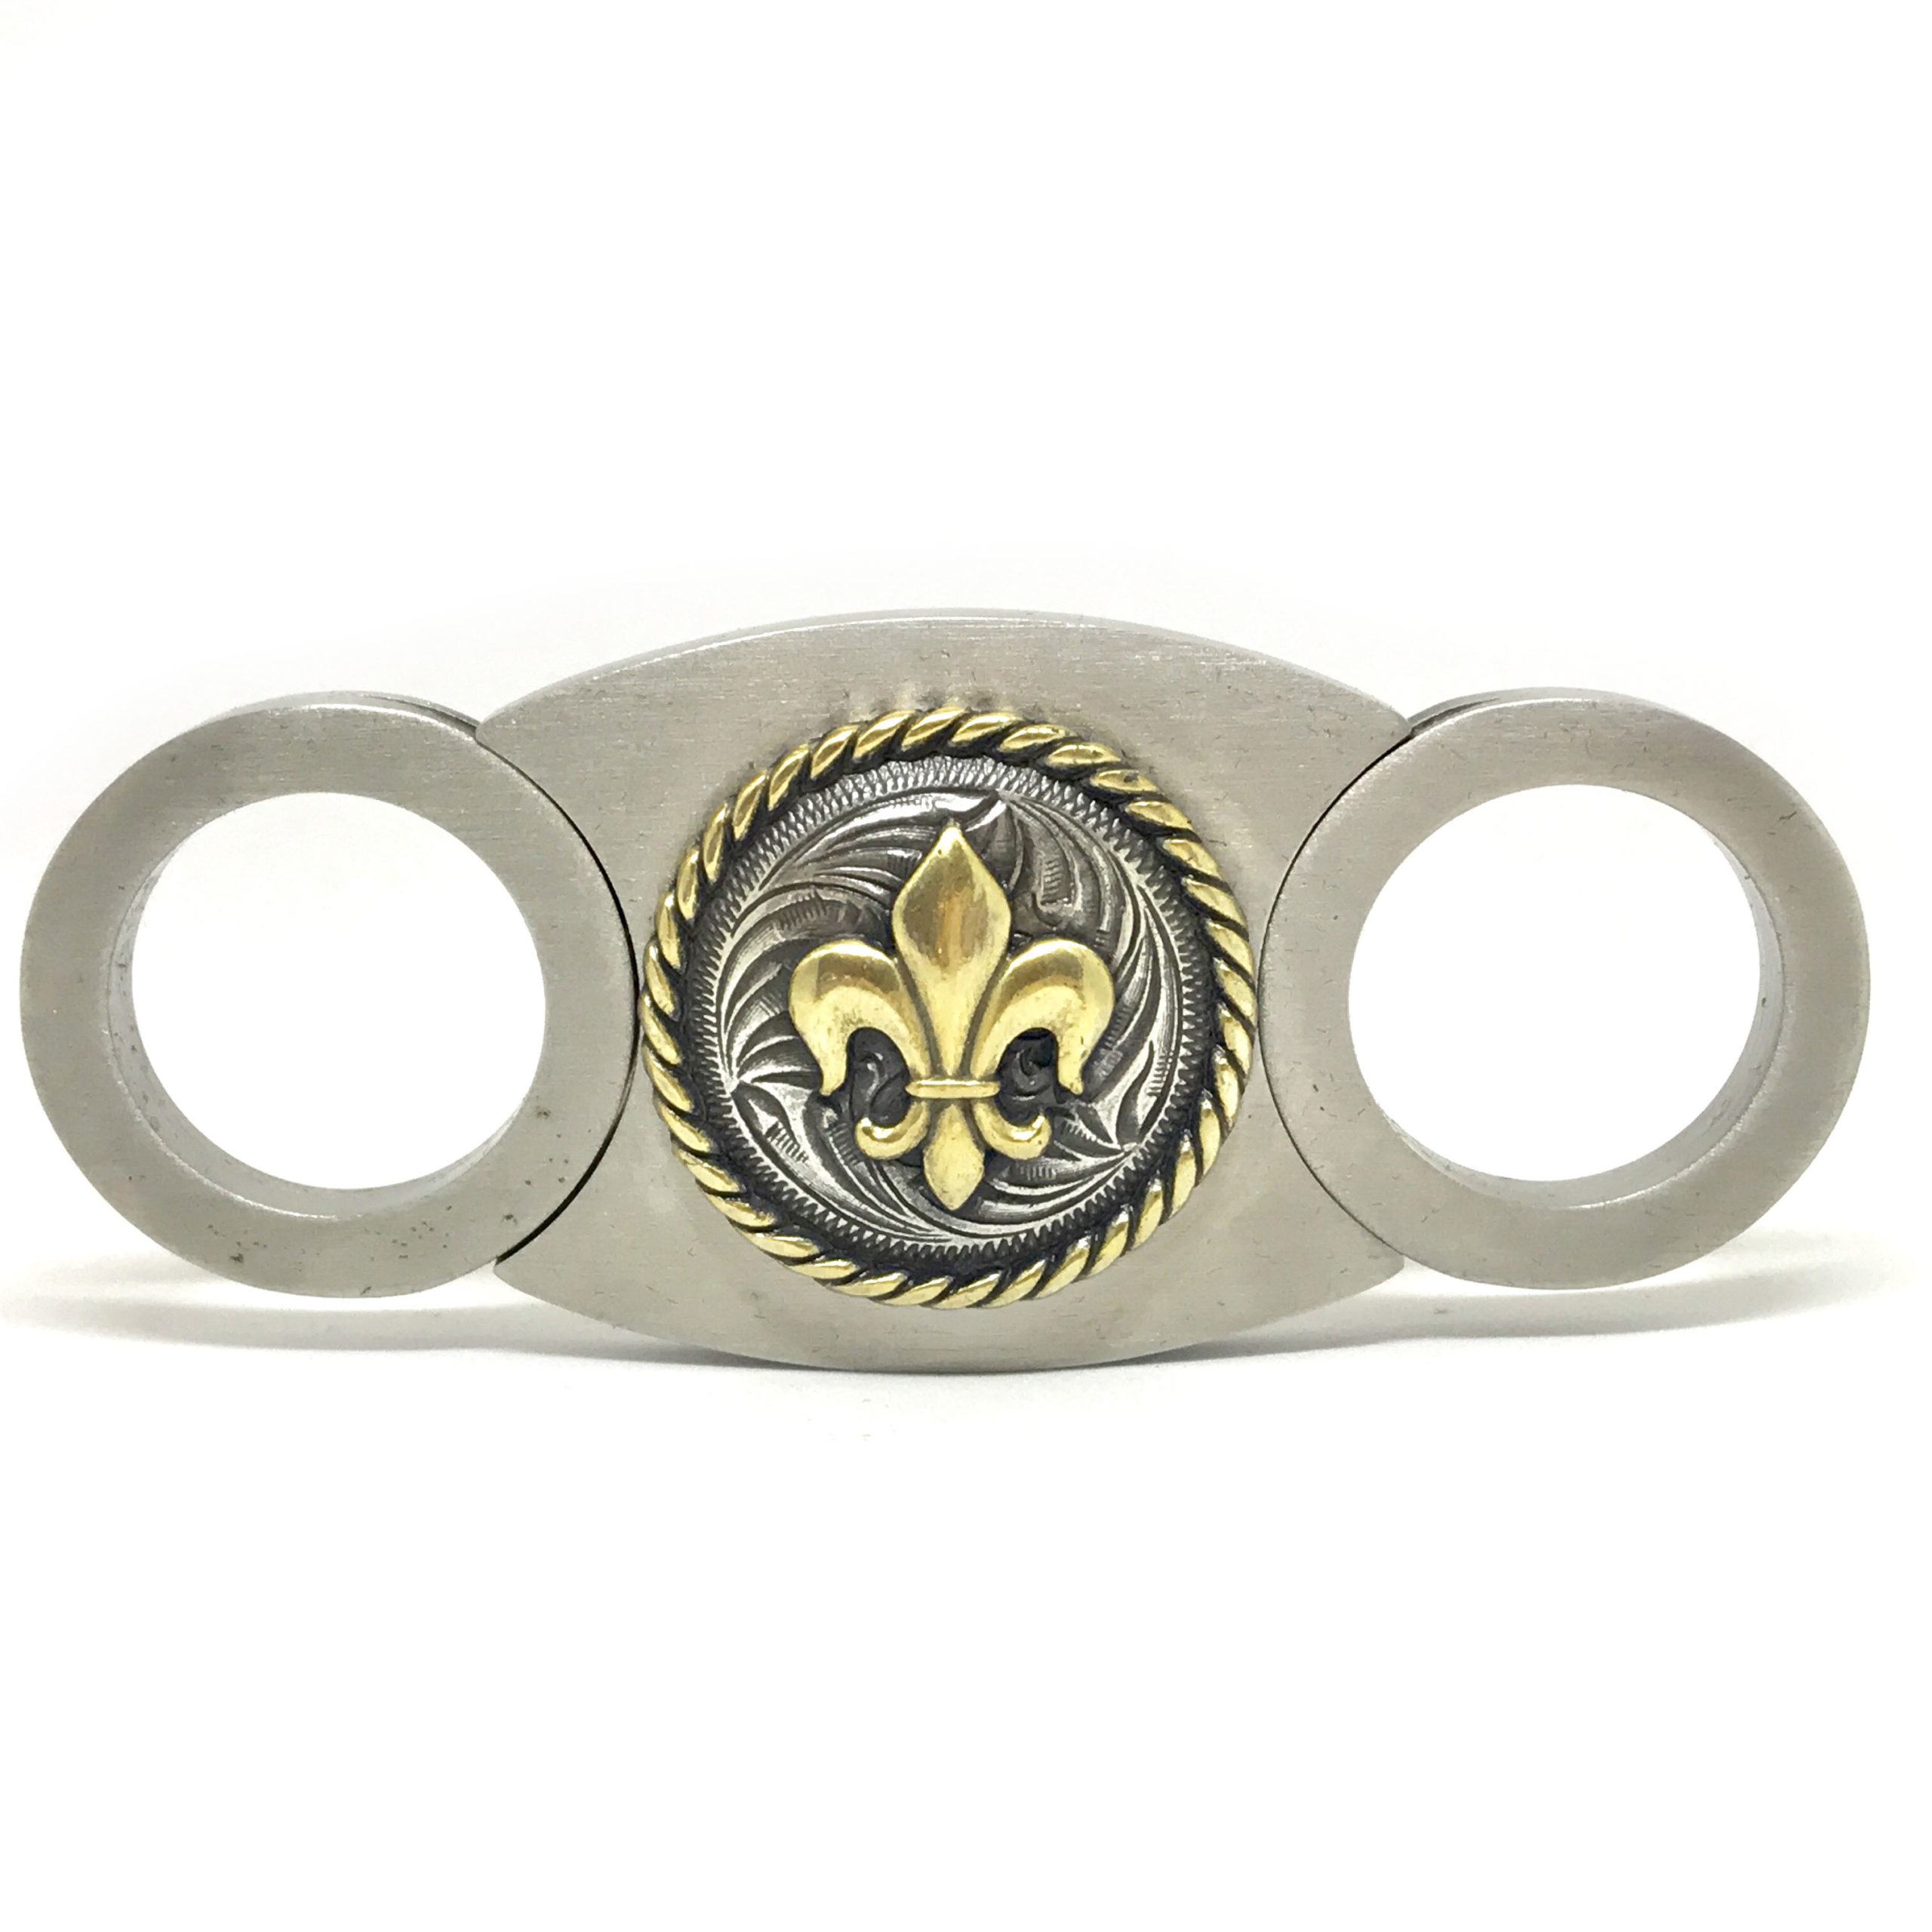 Picture of Cigar Cutters by Jim CT-FLR1 Stainless Steel Closed Guillotine Cutter With Fleur de Lis Embellishment